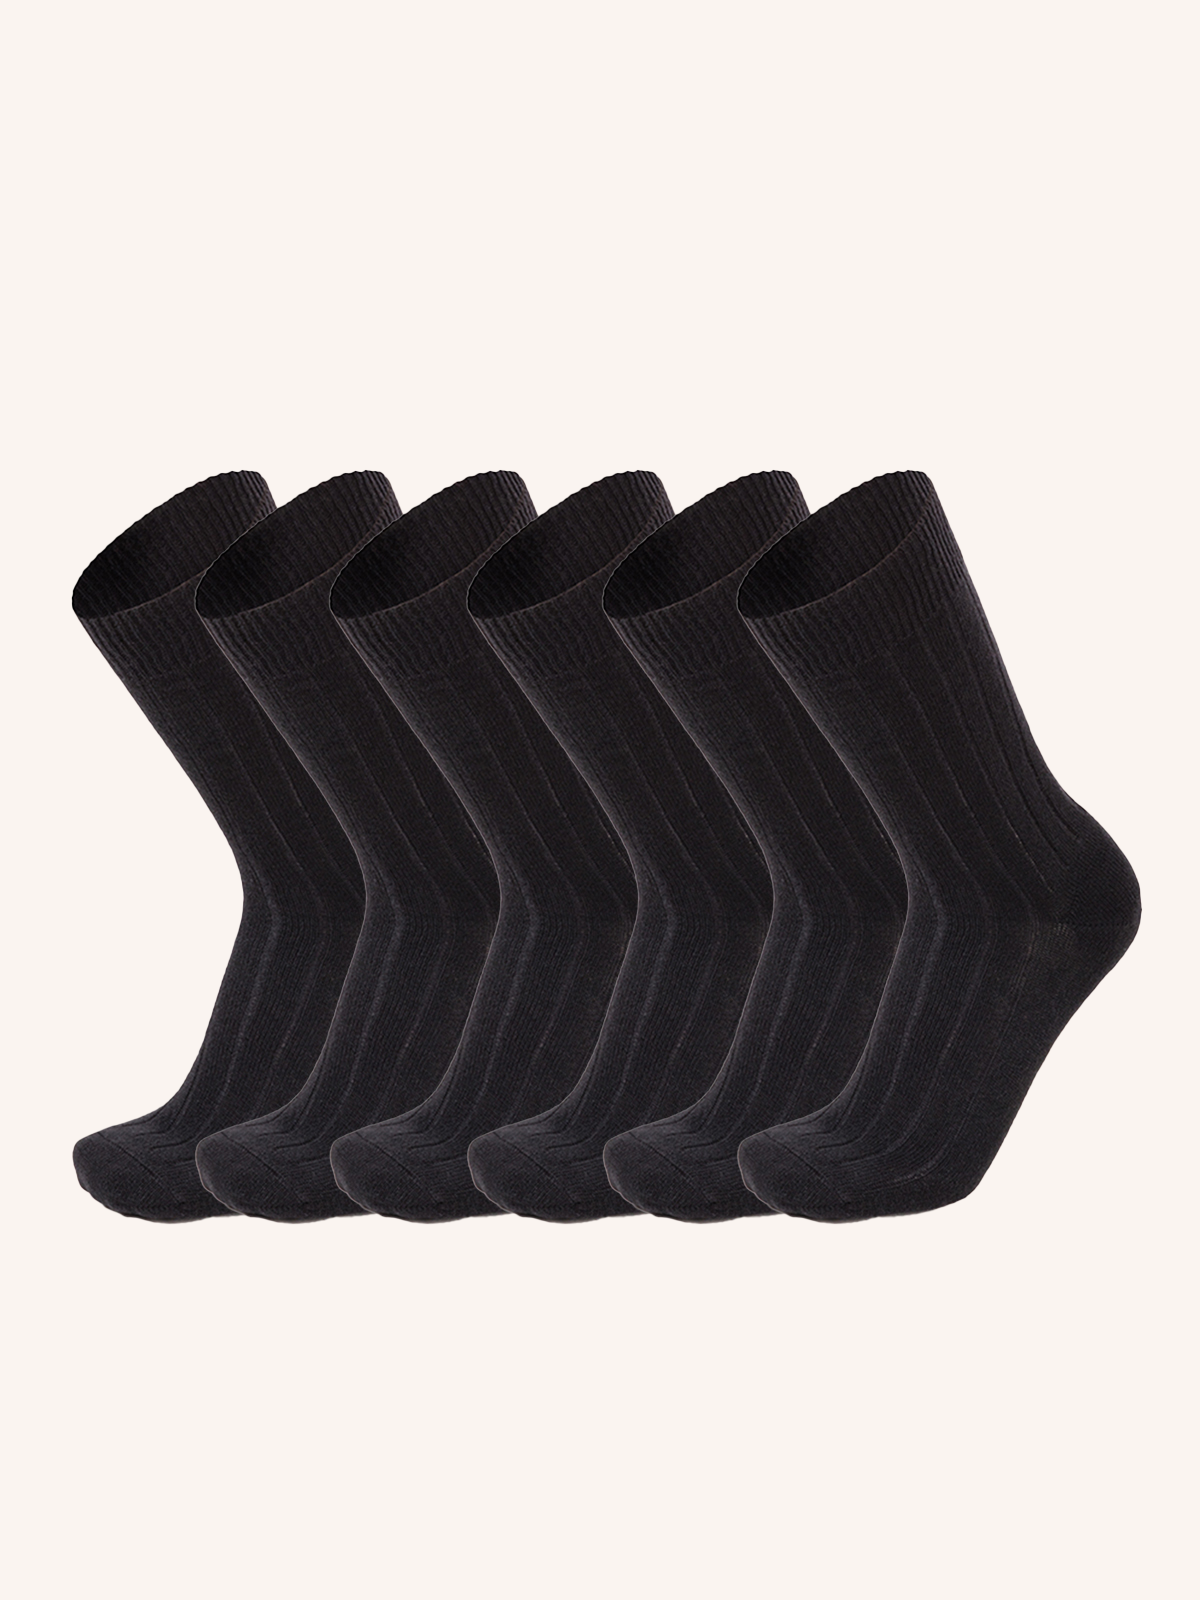 Short Wool Sock for Men | Plain Color | Pack of 6 pairs | Woolife UC